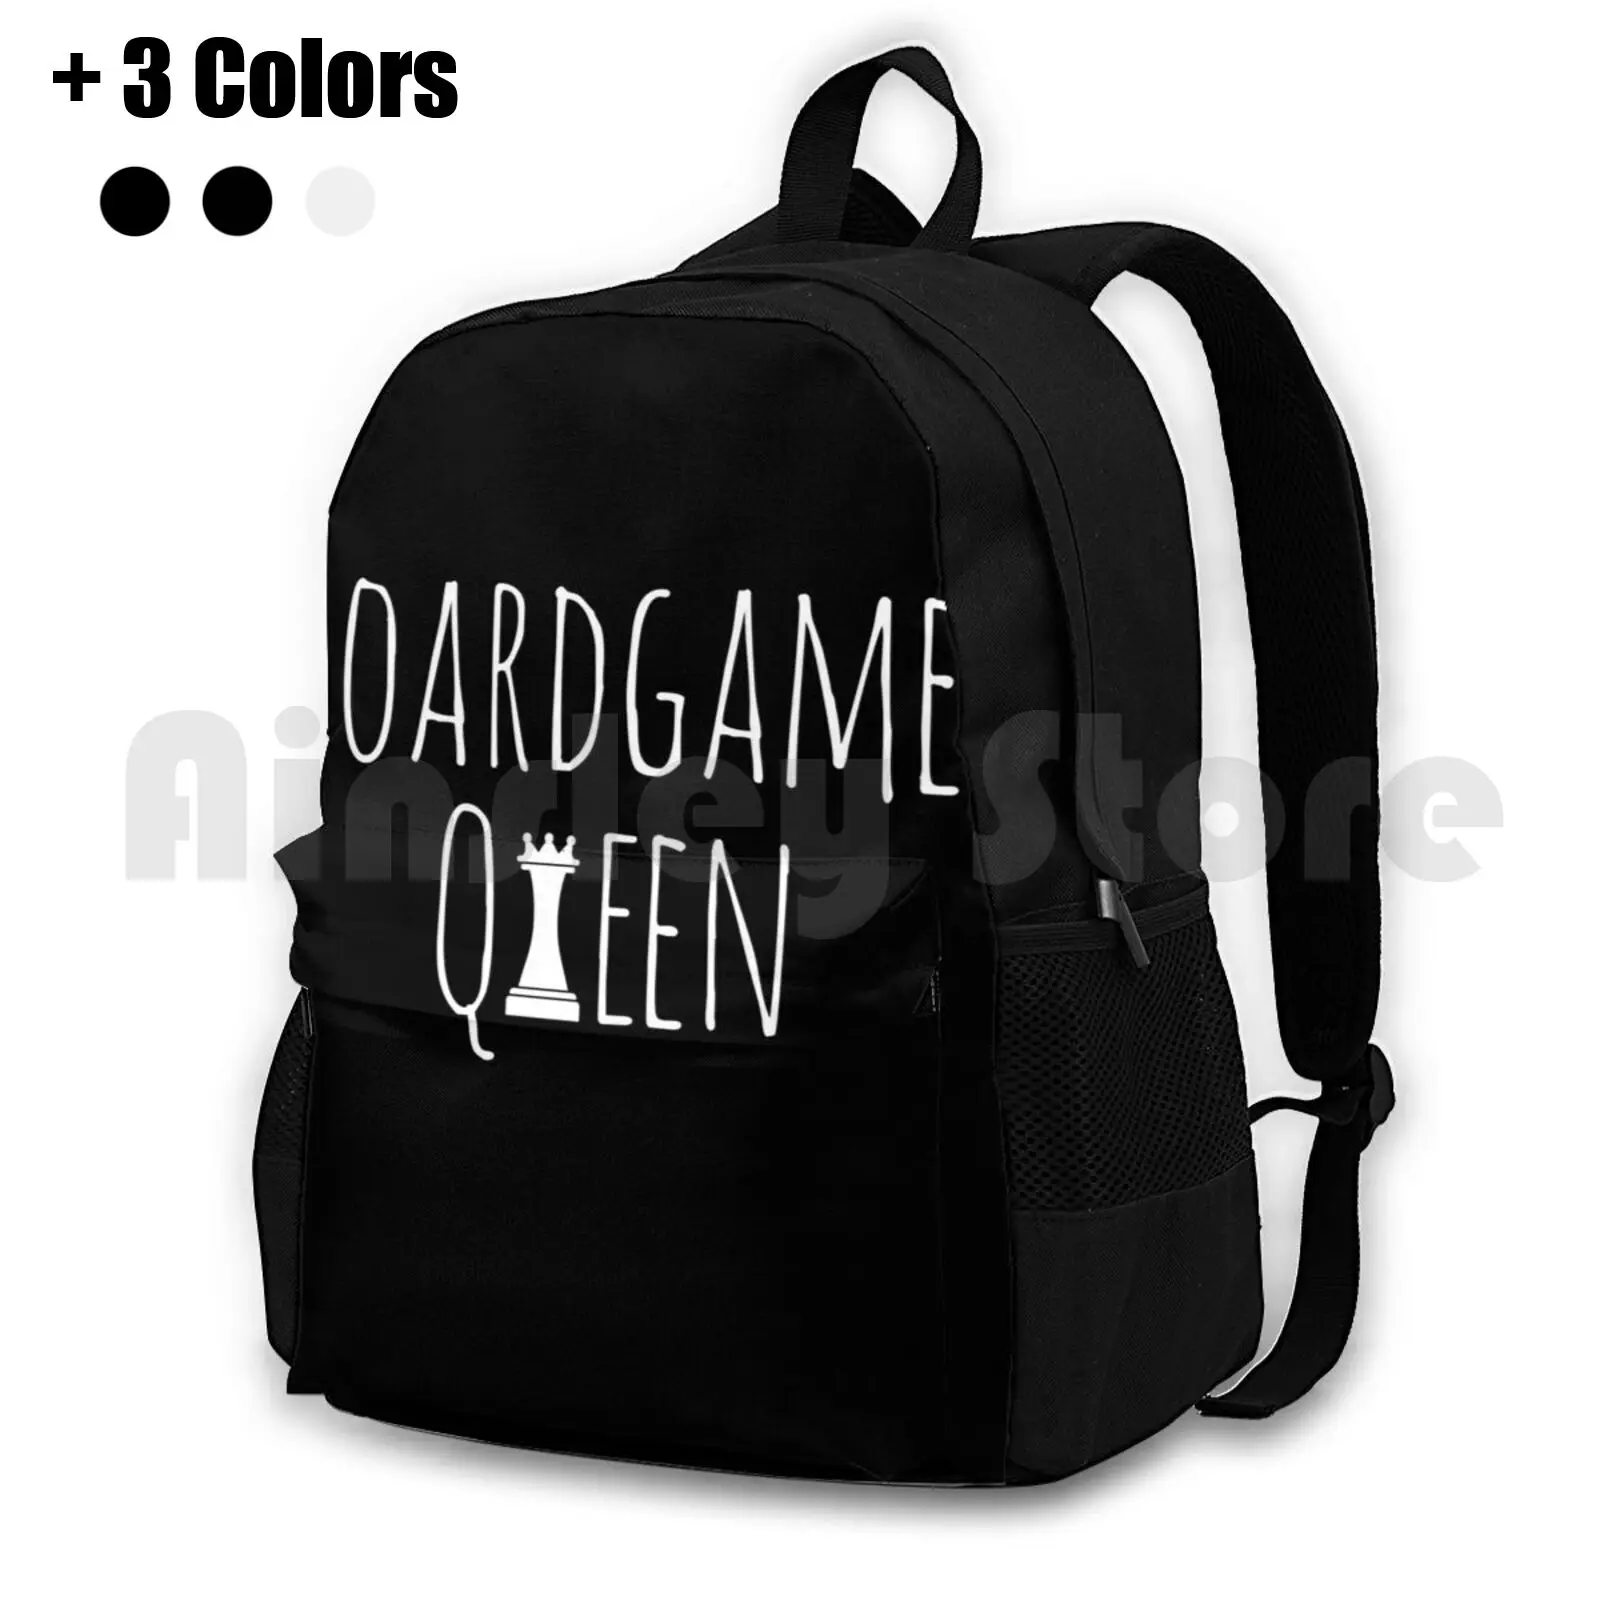 

Boardgame Queen Outdoor Hiking Backpack Riding Climbing Sports Bag Boardgame Board Game Boardgames Queen Gambit King Chess